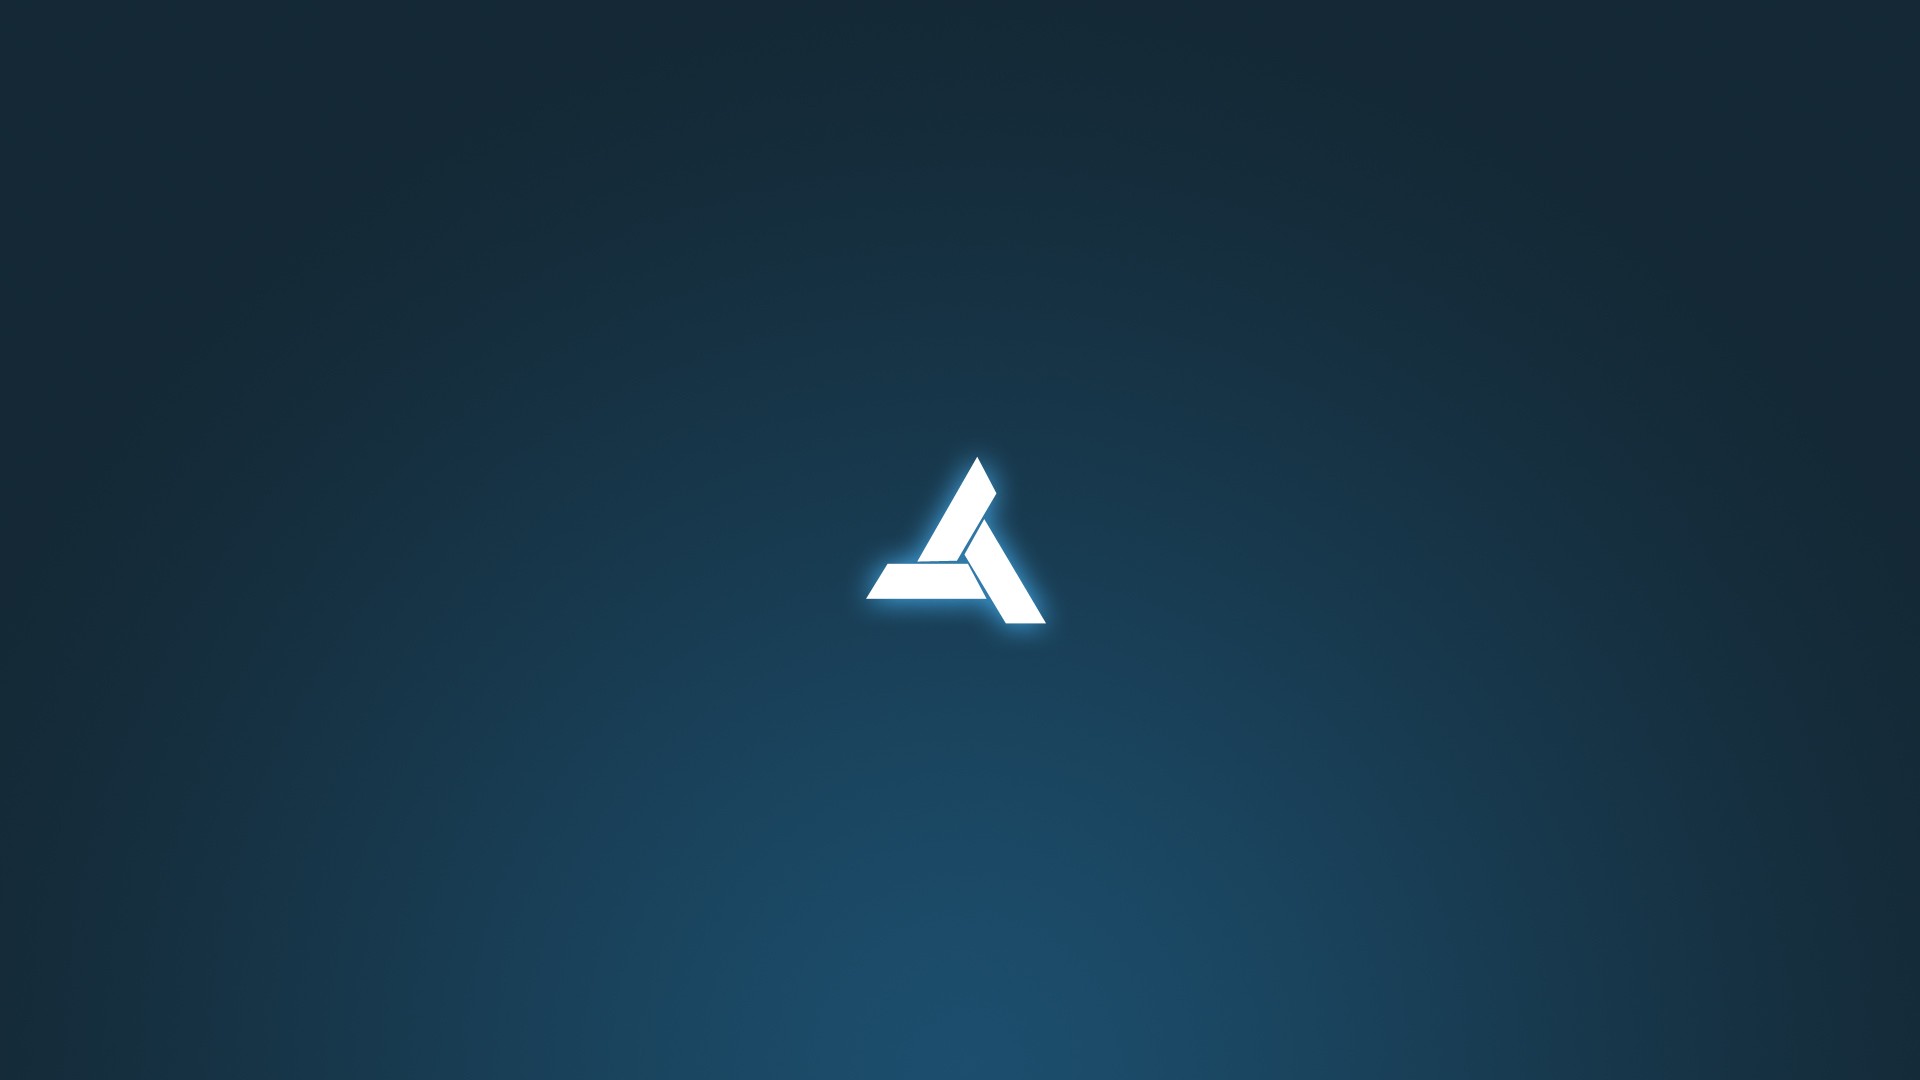 General 1920x1080 Assassin's Creed abstergo Abstergo Industries video games minimalism PC gaming blue background